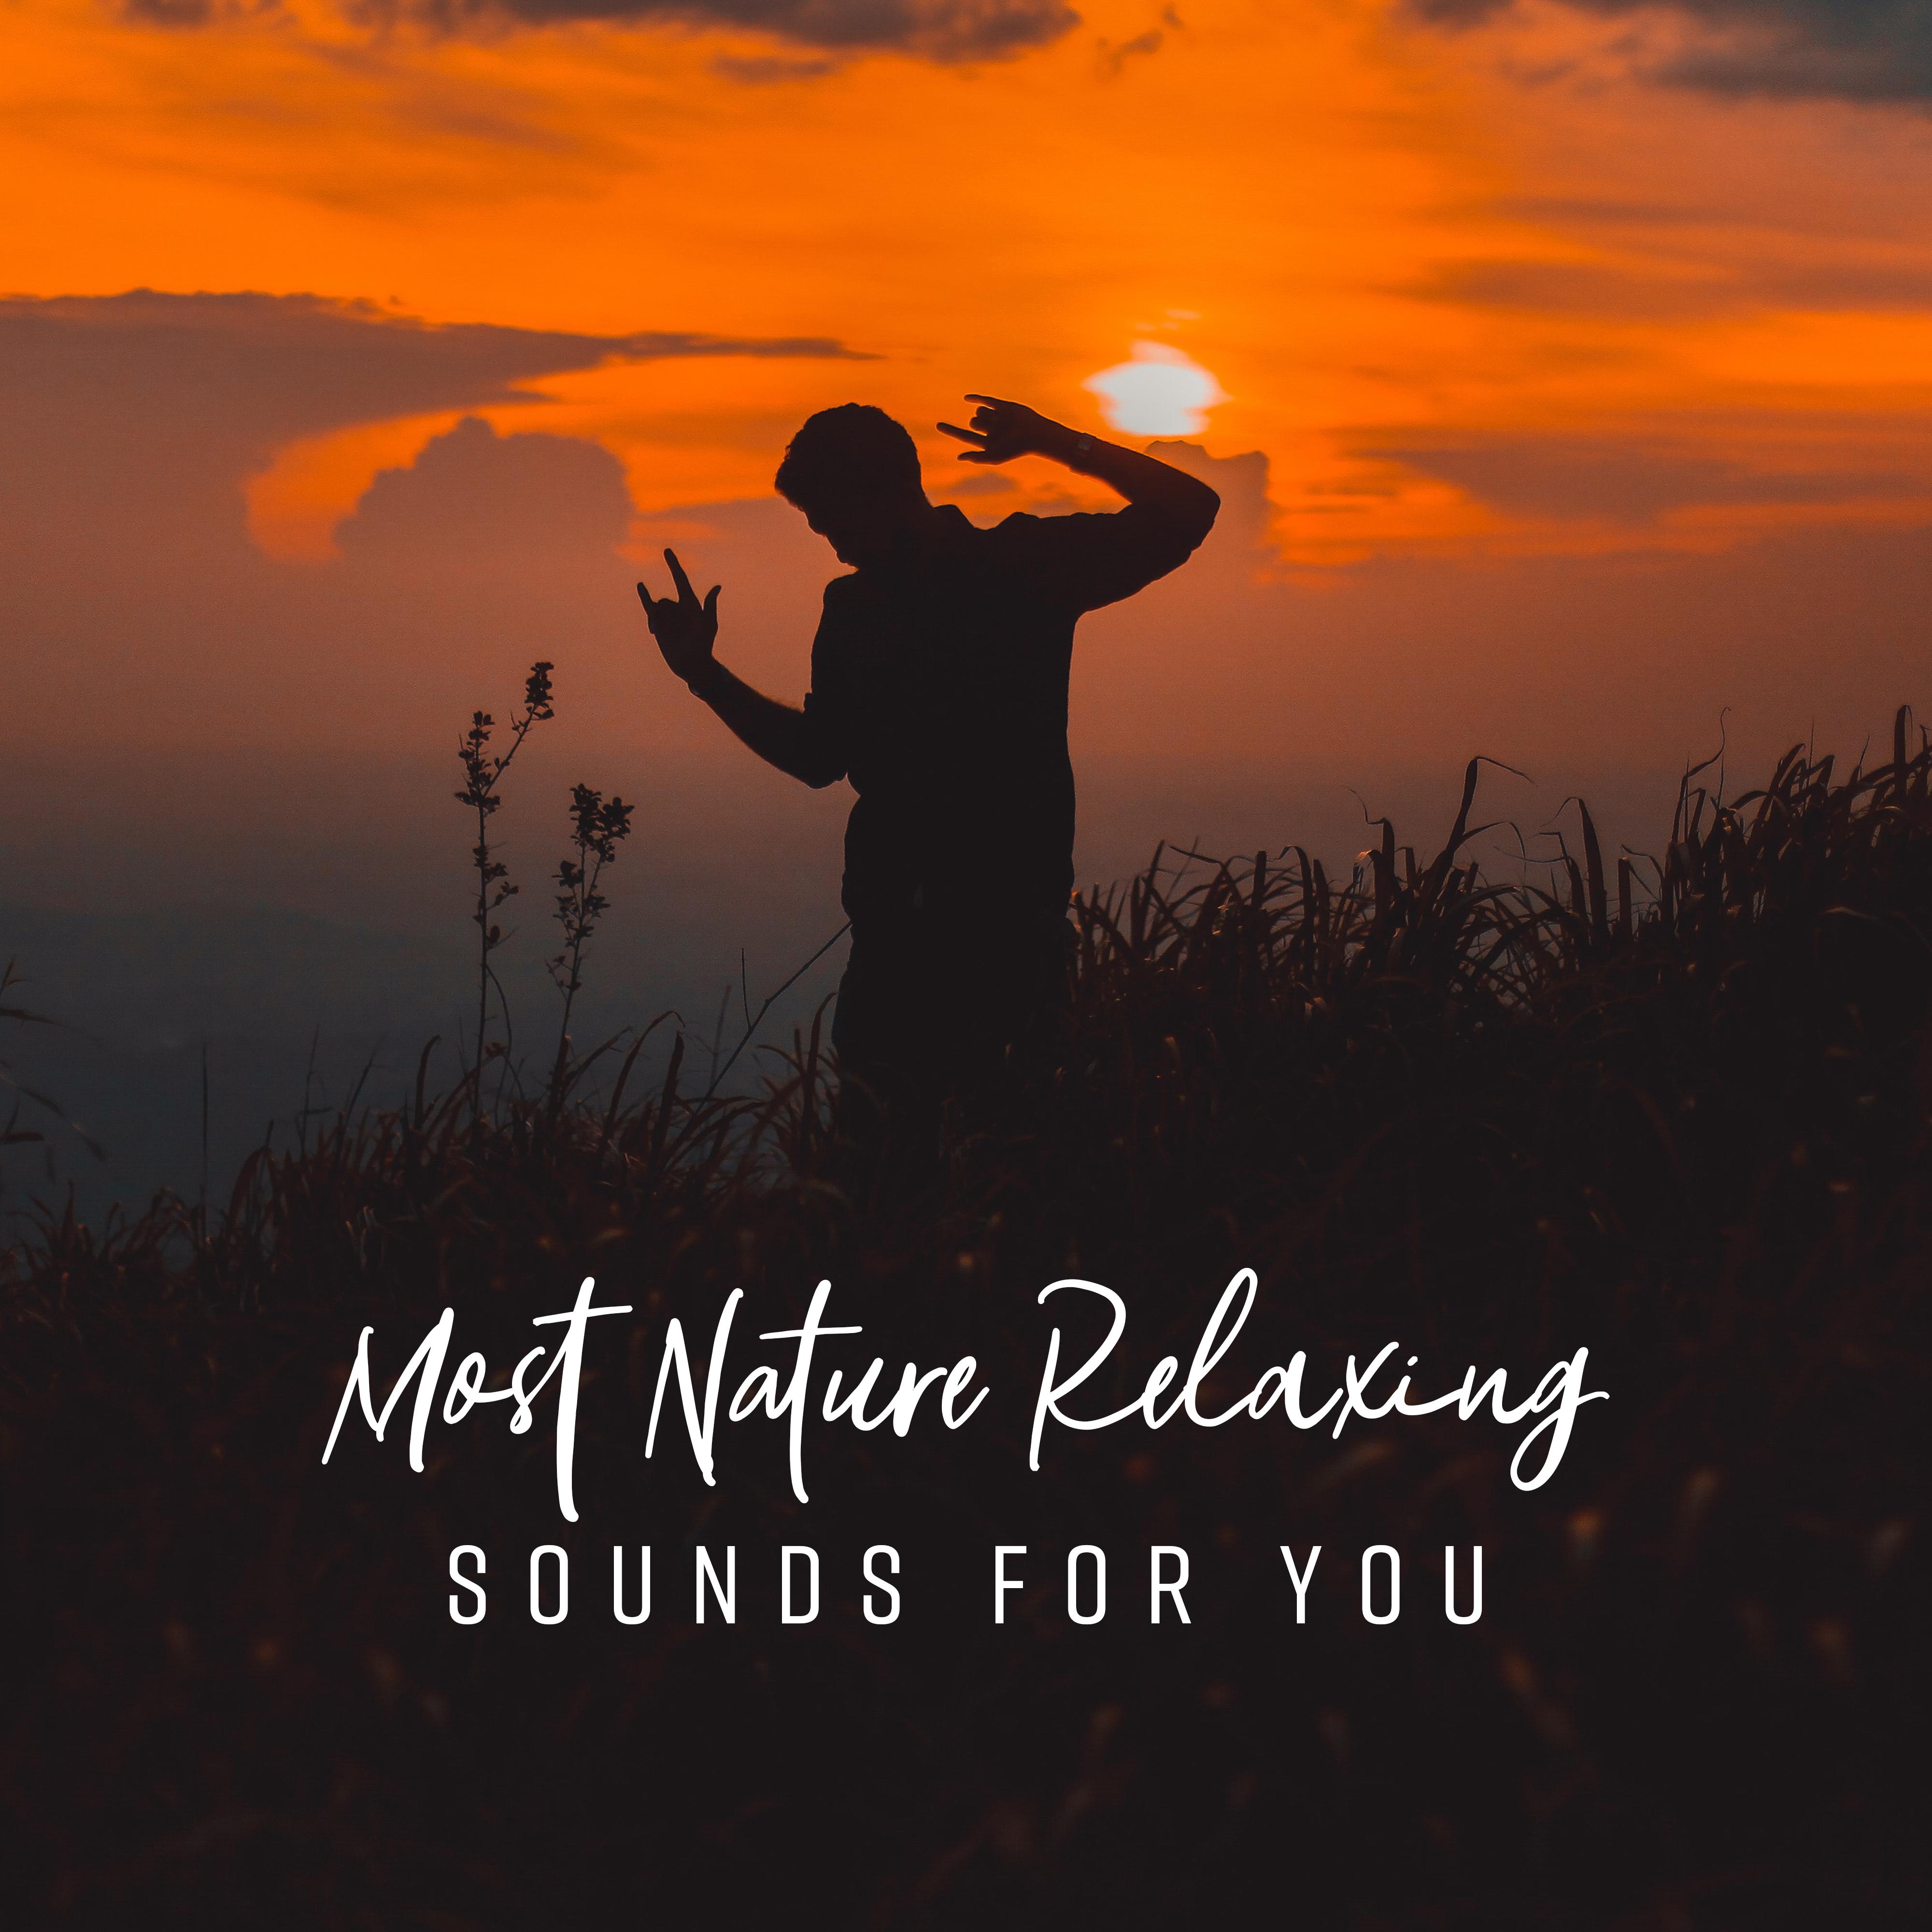 Most Nature Relaxing Sounds for You  Compilation of Nature 2019 New Age Music, Total Relaxation Sounds, Melodies to Calm Down, Stress Relief  Rest